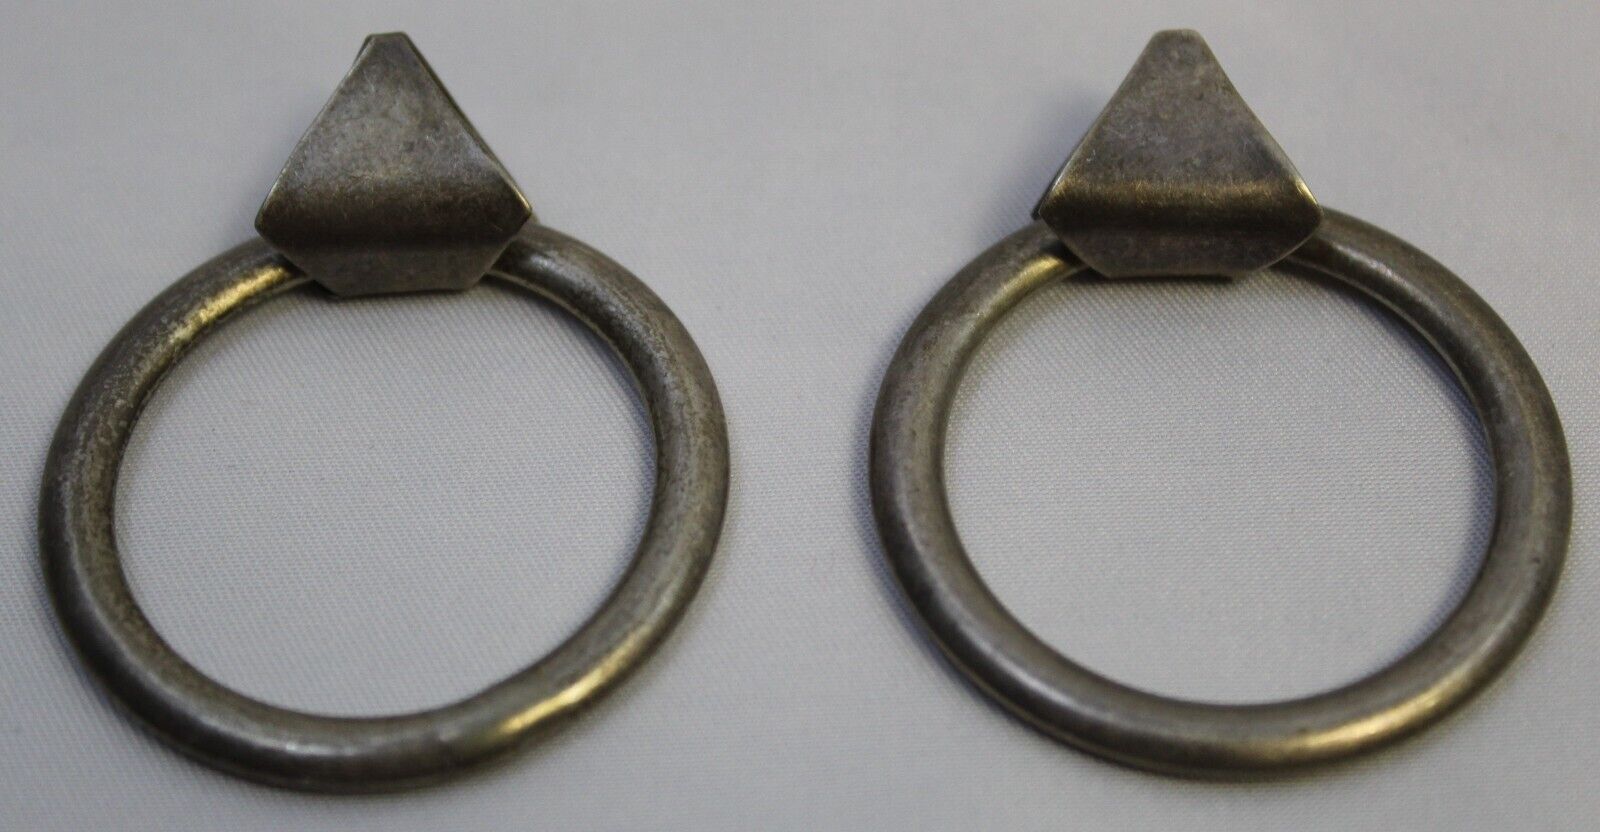 Vintage 1980s Earrings Pierced Post Stud Open Circle Triangle Pewter Oxidized